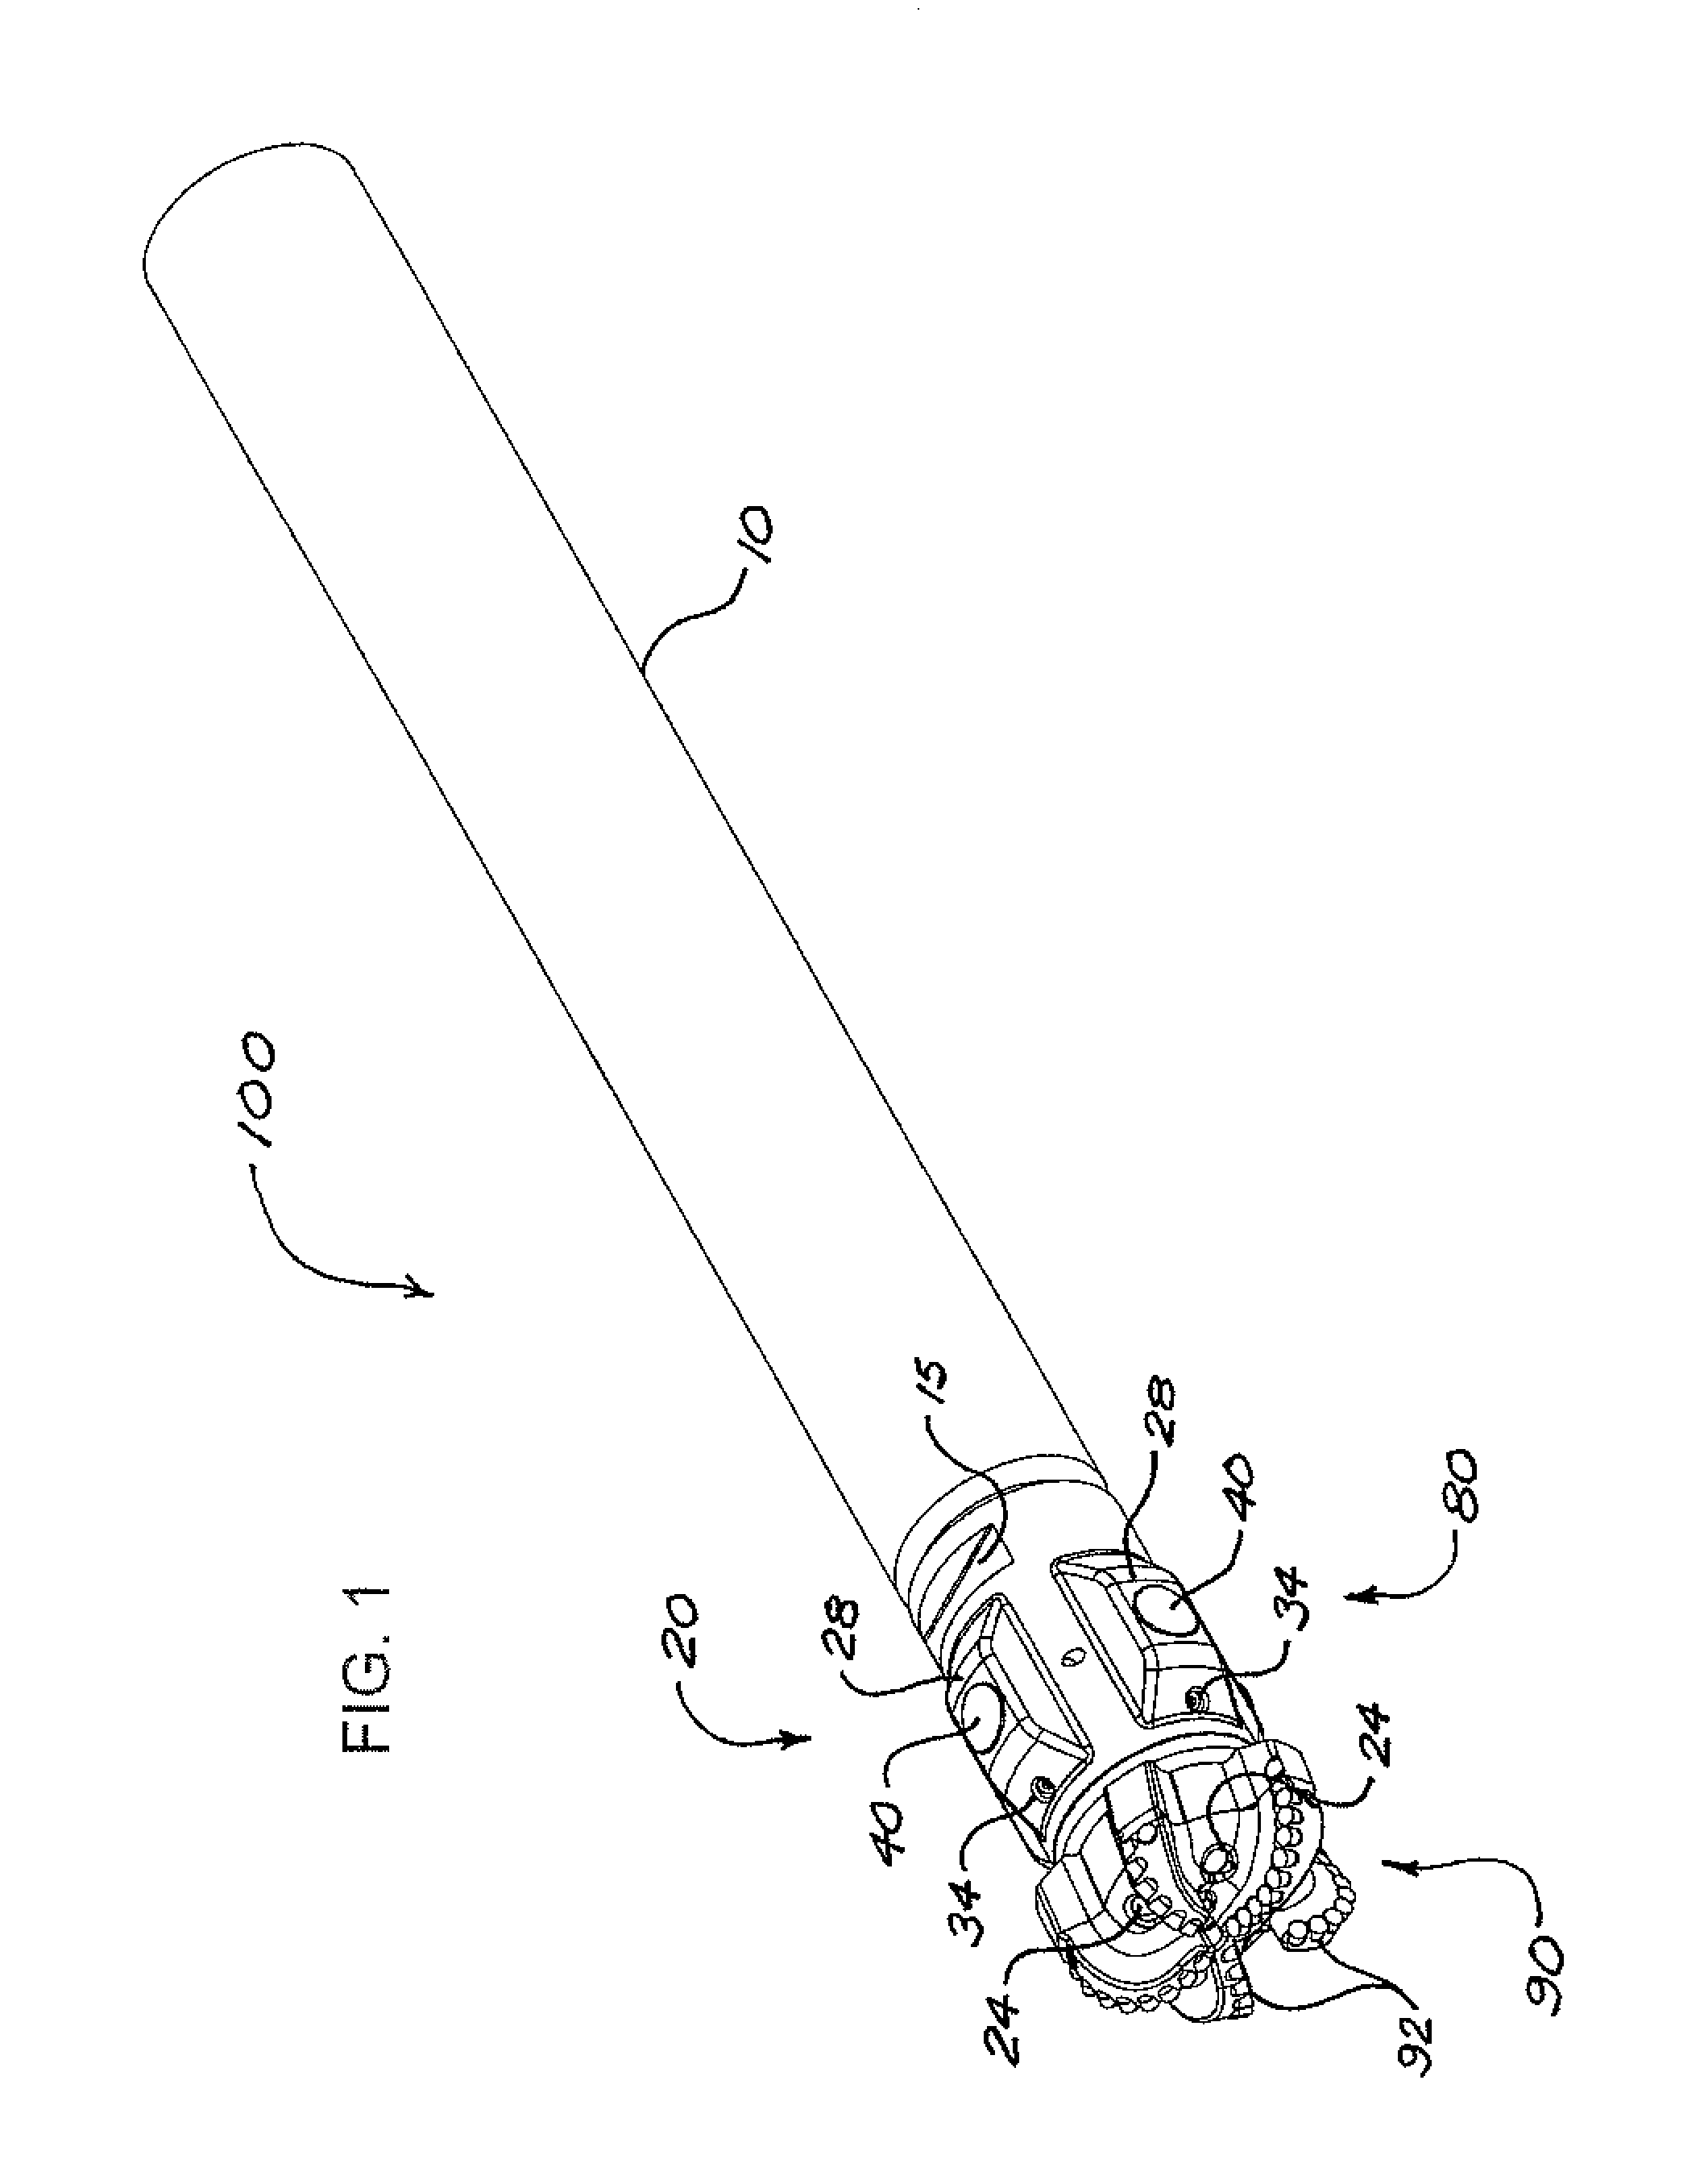 Rotary Steerable Push-the-Bit Drilling Apparatus with Self-Cleaning Fluid Filter